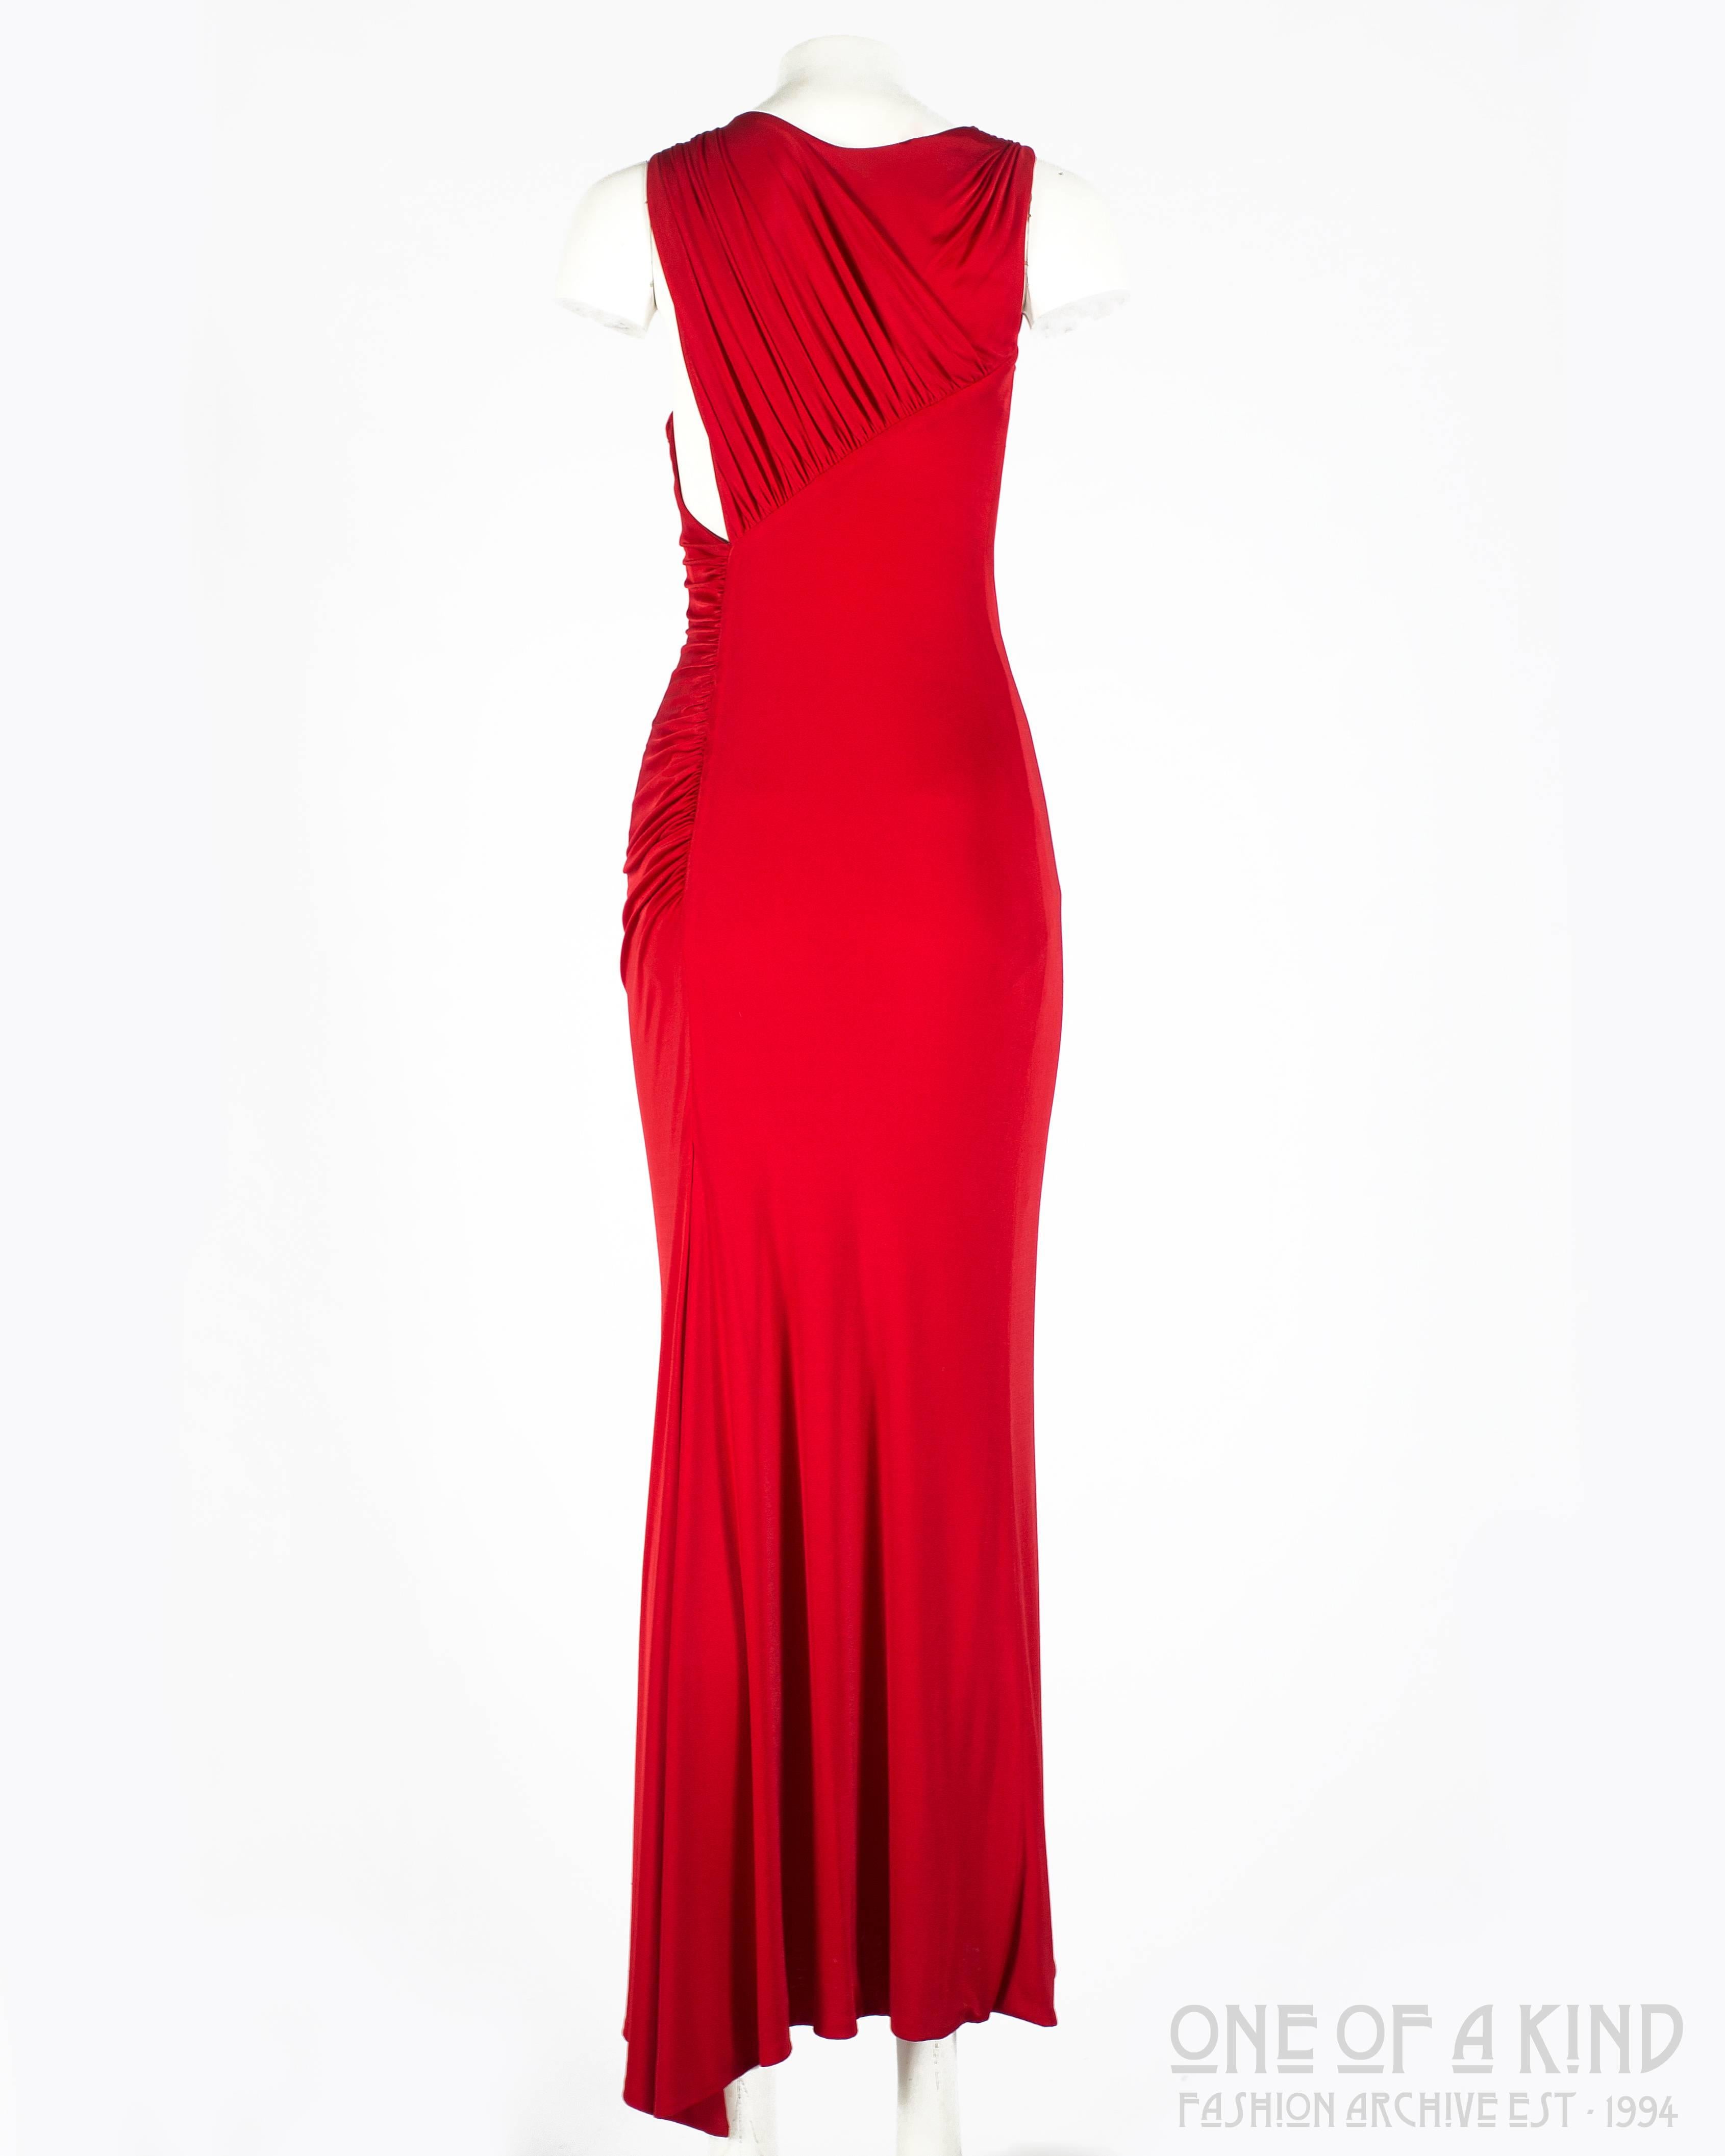 Gianni Versace red silk jersey pleated full length evening dress with internal bodysuit and pleated bodice at the back

circa 1990s